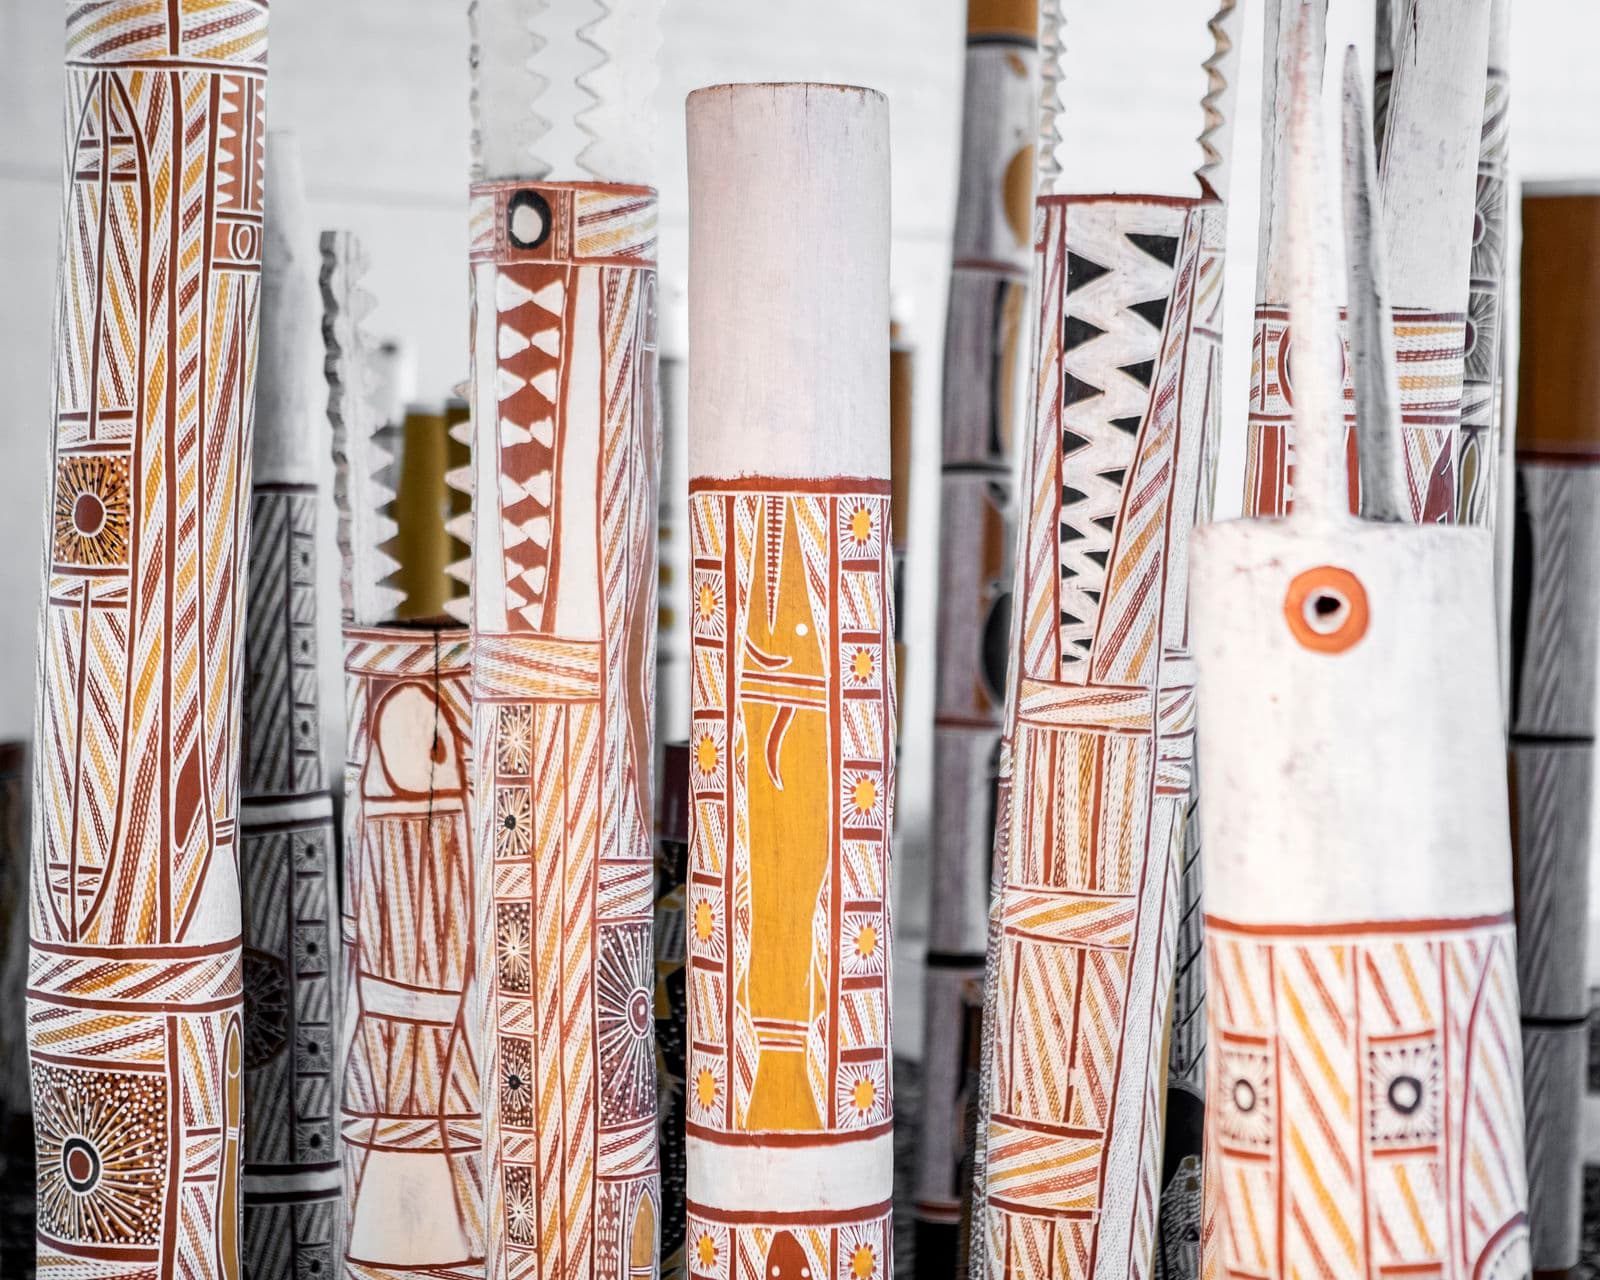 A section of the aboriginal memorial poles in close up